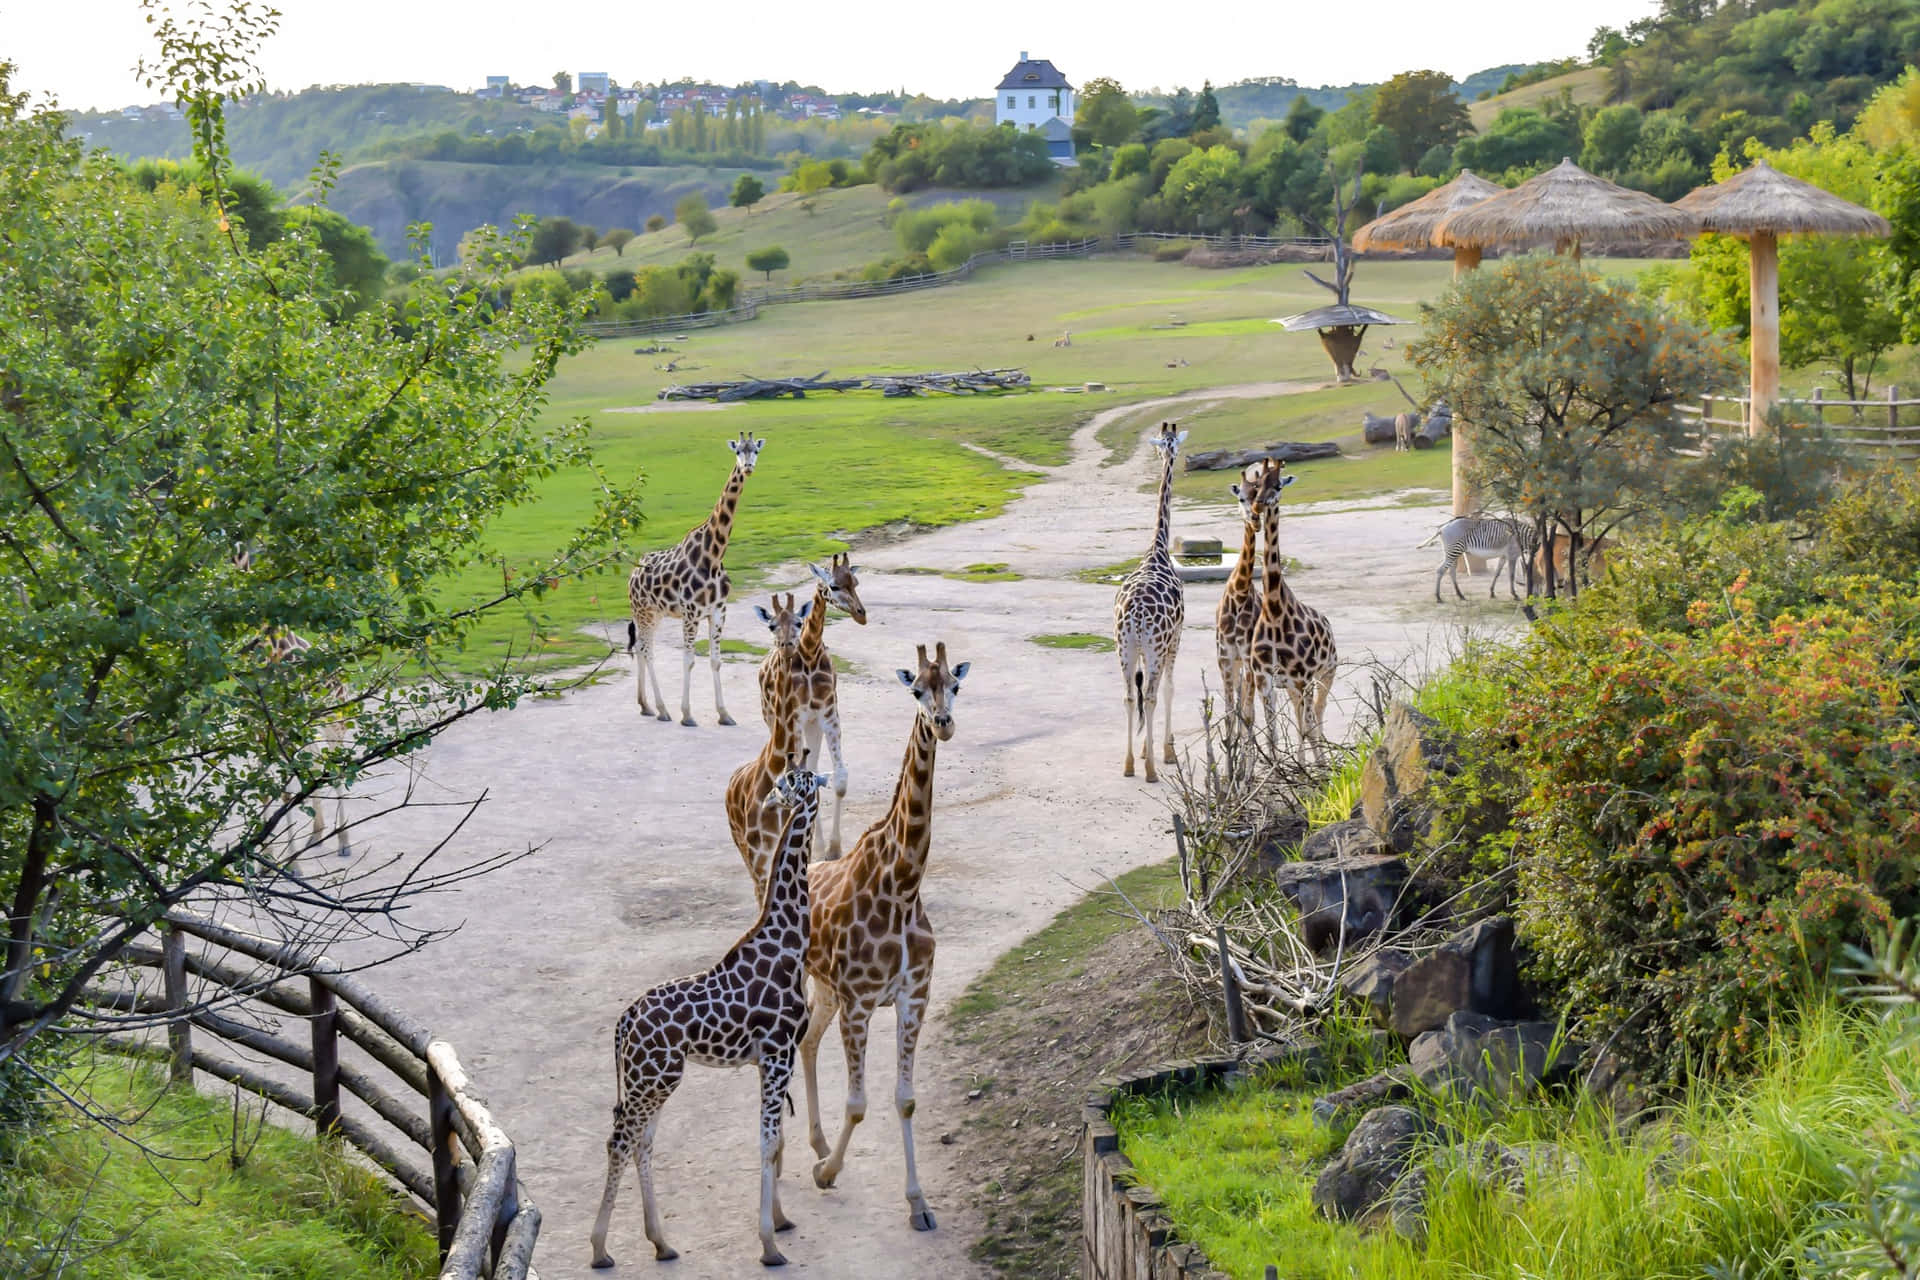 Majestic Giraffes At The Prague Zoo Background